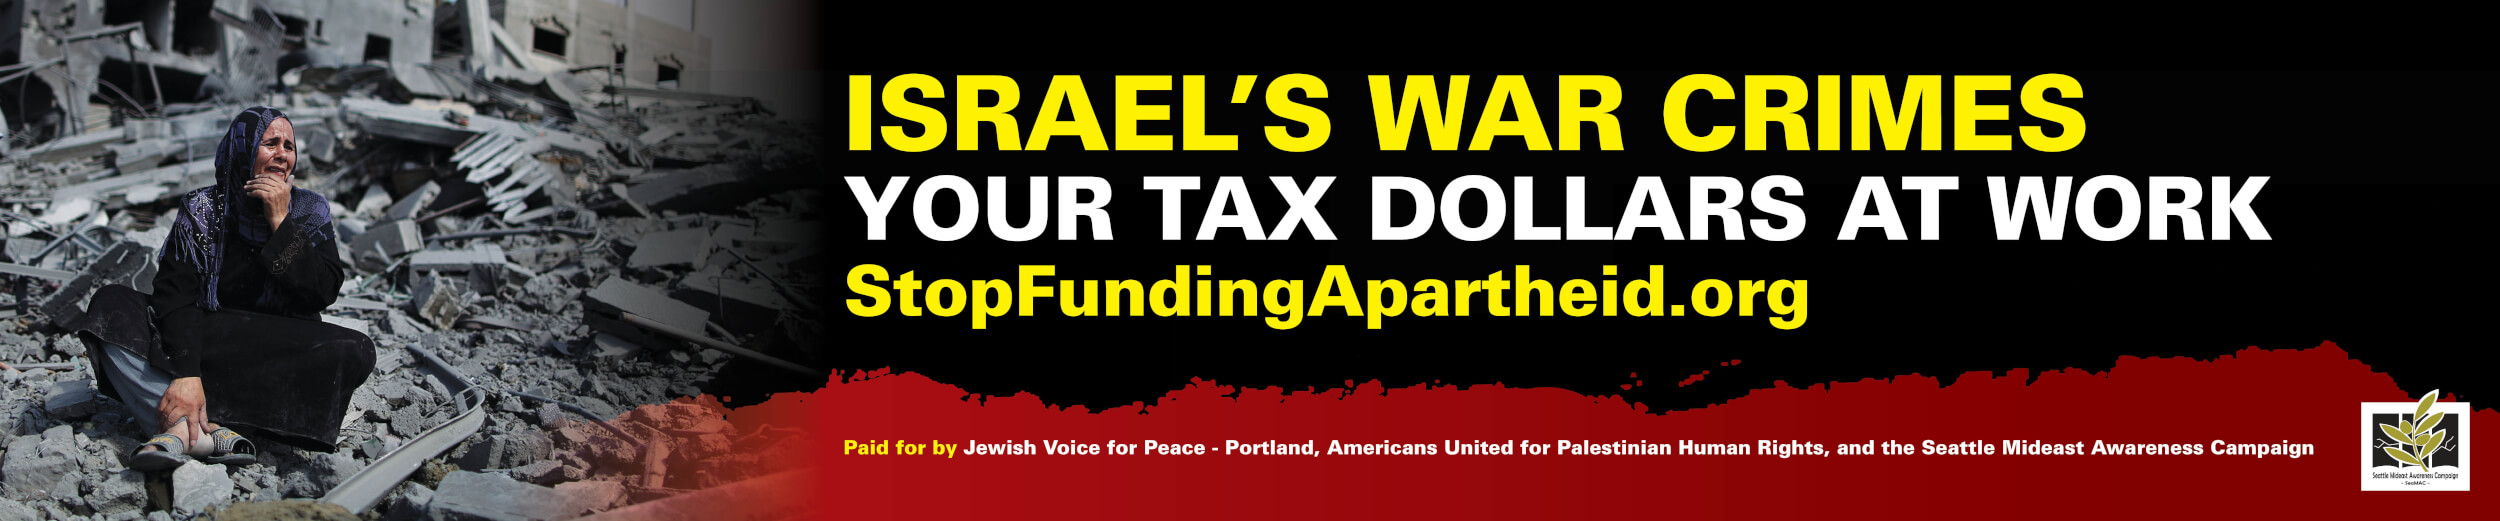 Seattle Mideast Awareness Campaign (SeaMAC) ad on Portland’s TriMet buses with the slogan ISRAEL’S WAR CRIMES: YOUR TAX DOLLARS AT WORK. (graphic: SeaMAC)